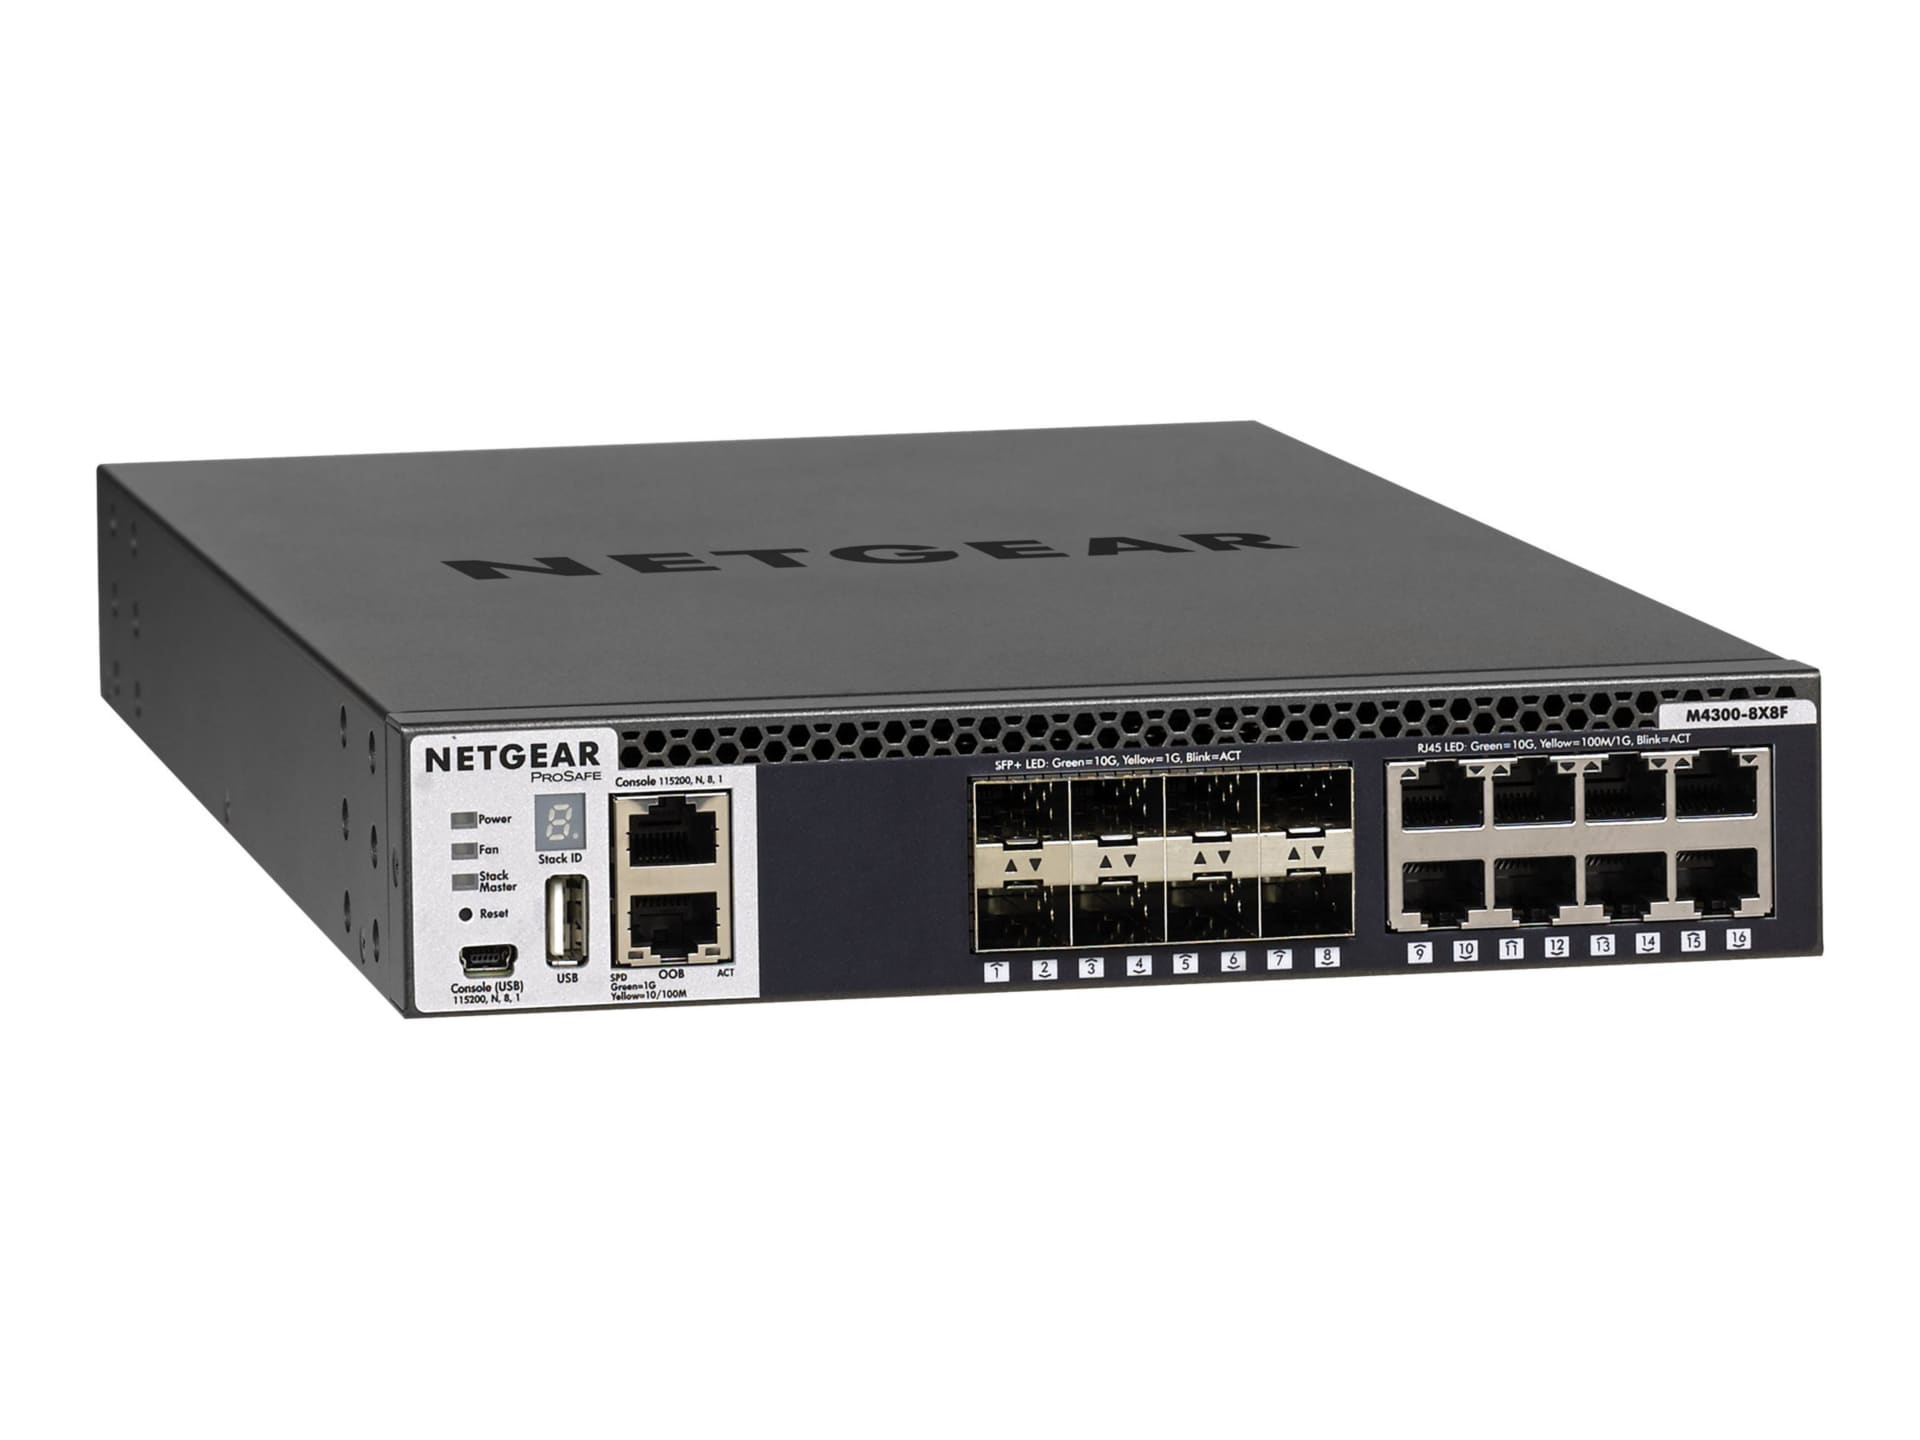 Netgear M4300 Stackable Managed Switch with 16x10G Including 8x10GBASE-T an